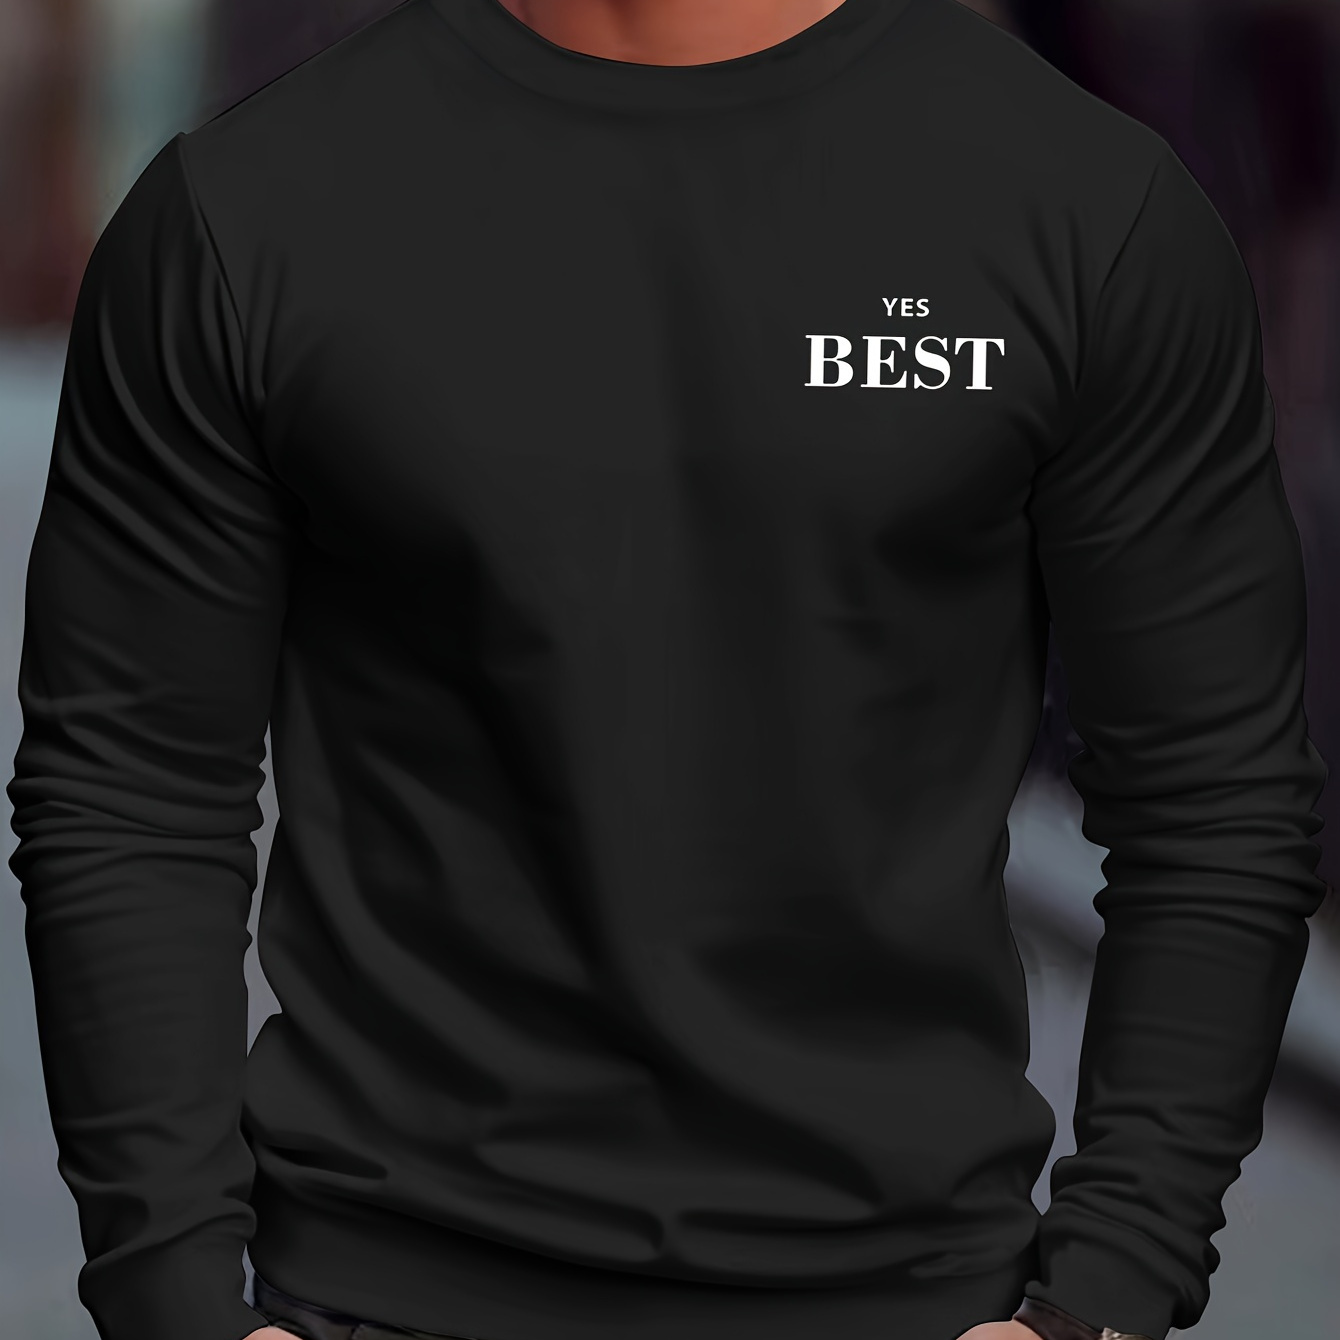 

' Yes Boss ' Patter Print Crew Neck Sweatshirt Pullover For Men Solid Color Sweatshirts For Spring Fall Long Sleeve Tops